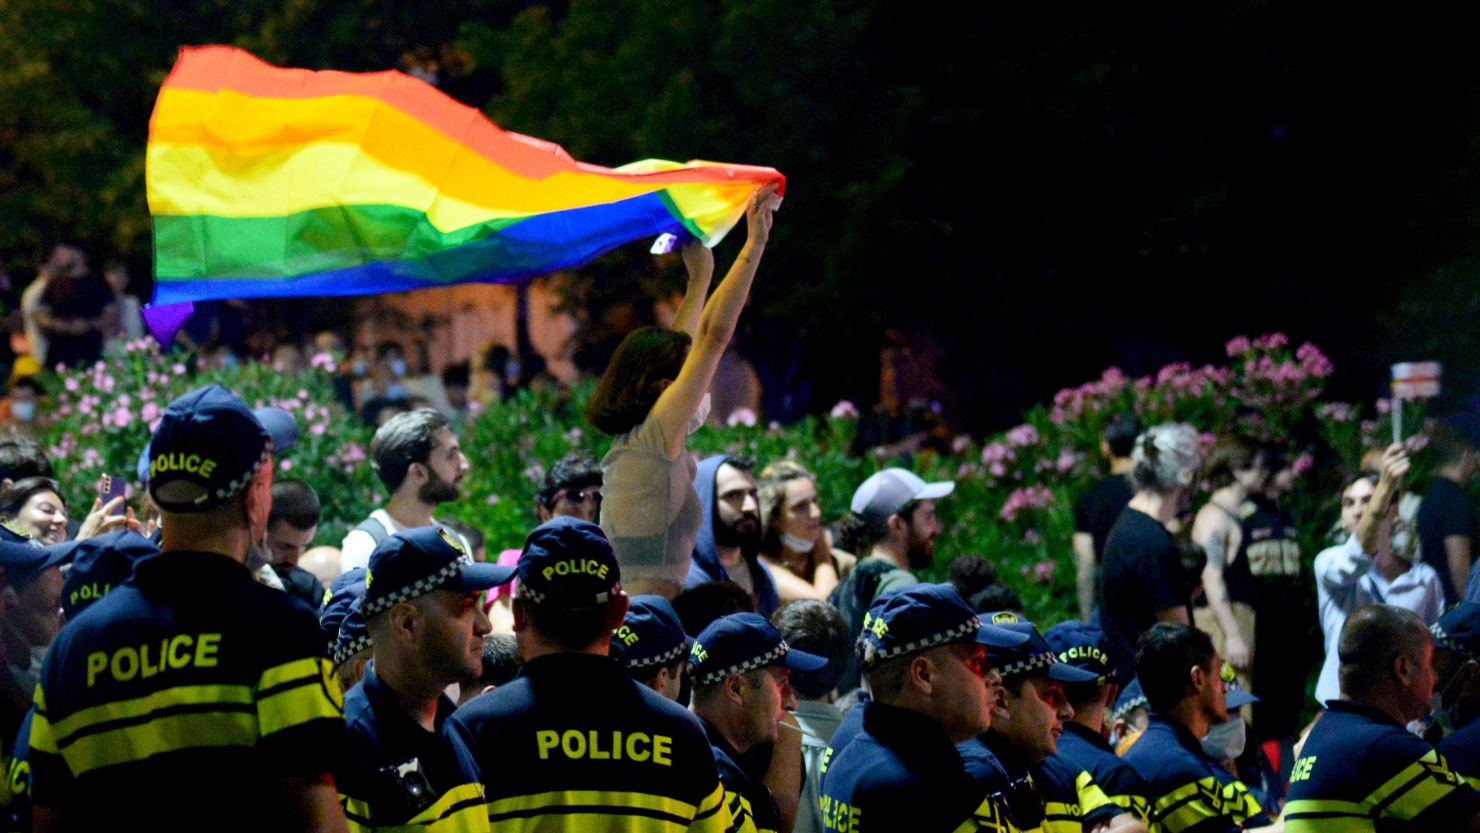 A demonstrator holds a rainbow flag at a rally in Tbilisi, Georgia, on July 6, in support of people who were injured when members of violent groups disrupted a Pride march the day before.